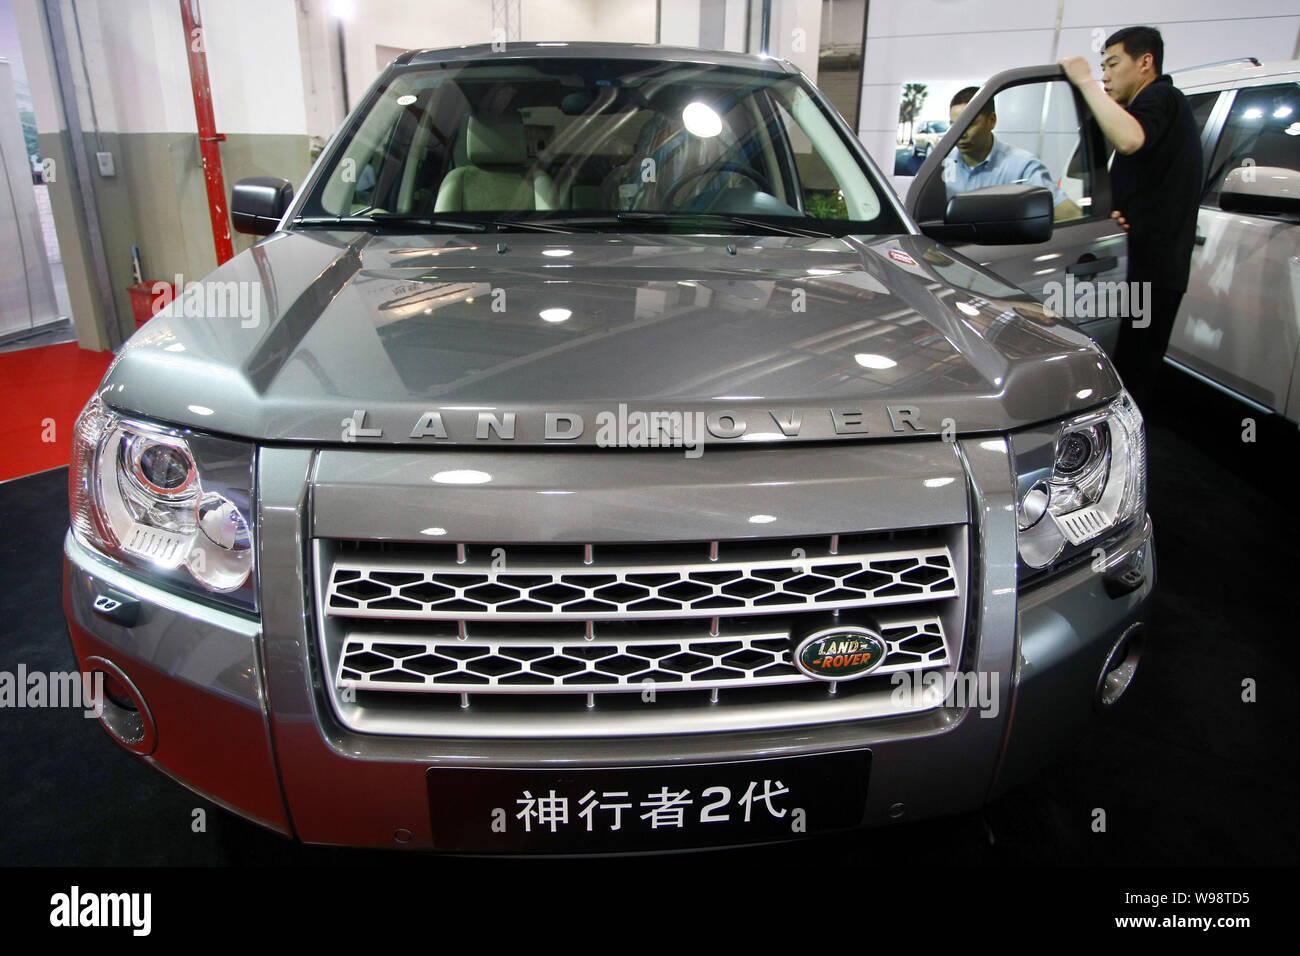 A Chinese salesman introduces a Land Rover Freelander 2 to a car buyer in a dealership in Shanghai, China, 11 June 2010. Stock Photo